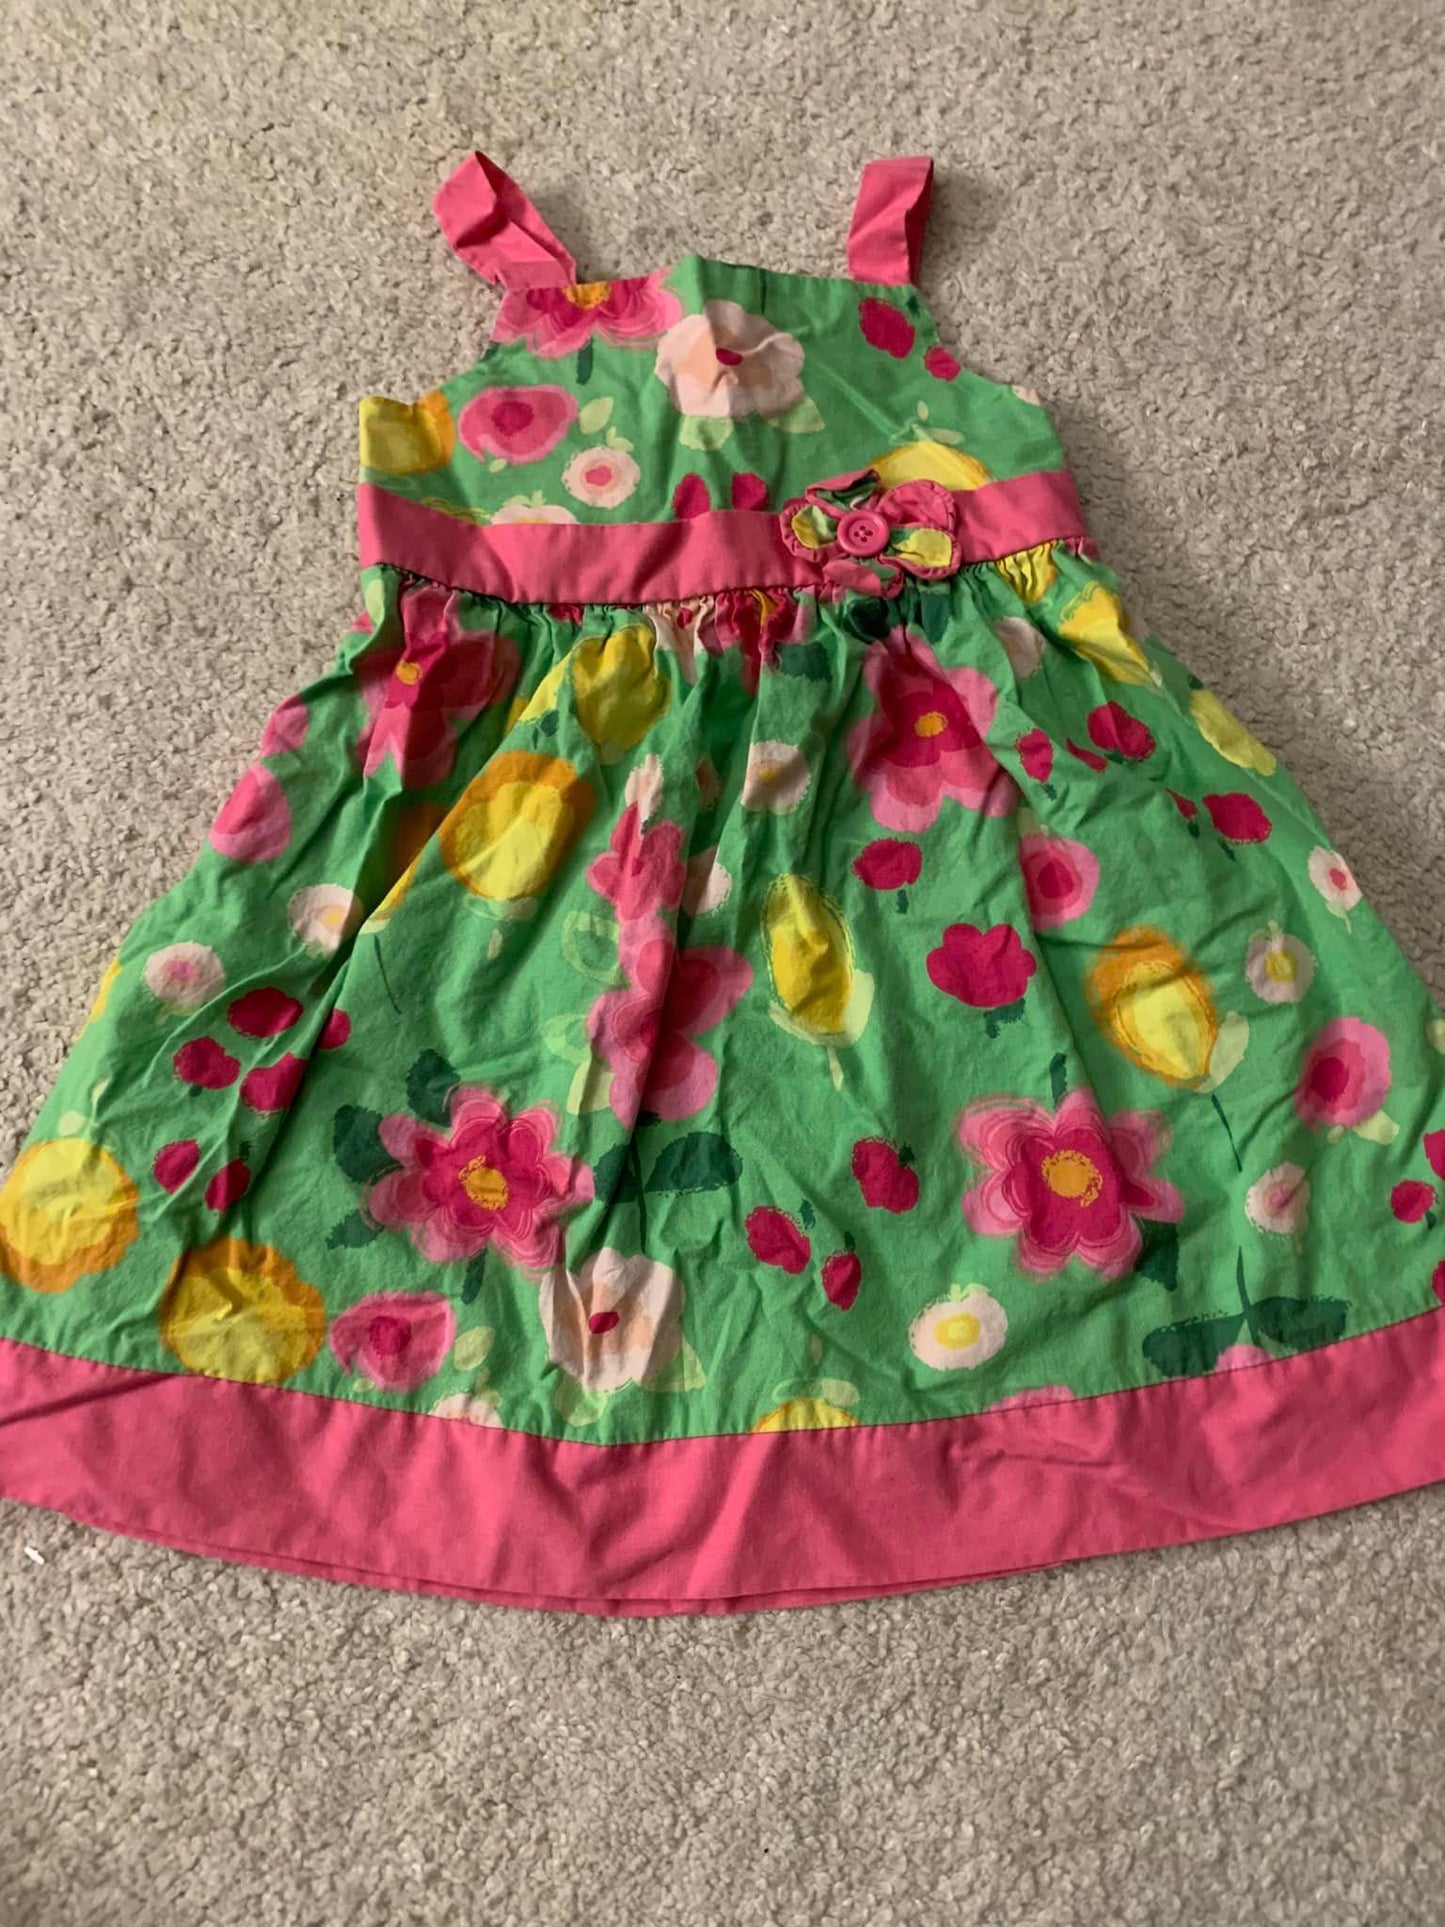 4T Girls Floral Dress with Ribbon Ties